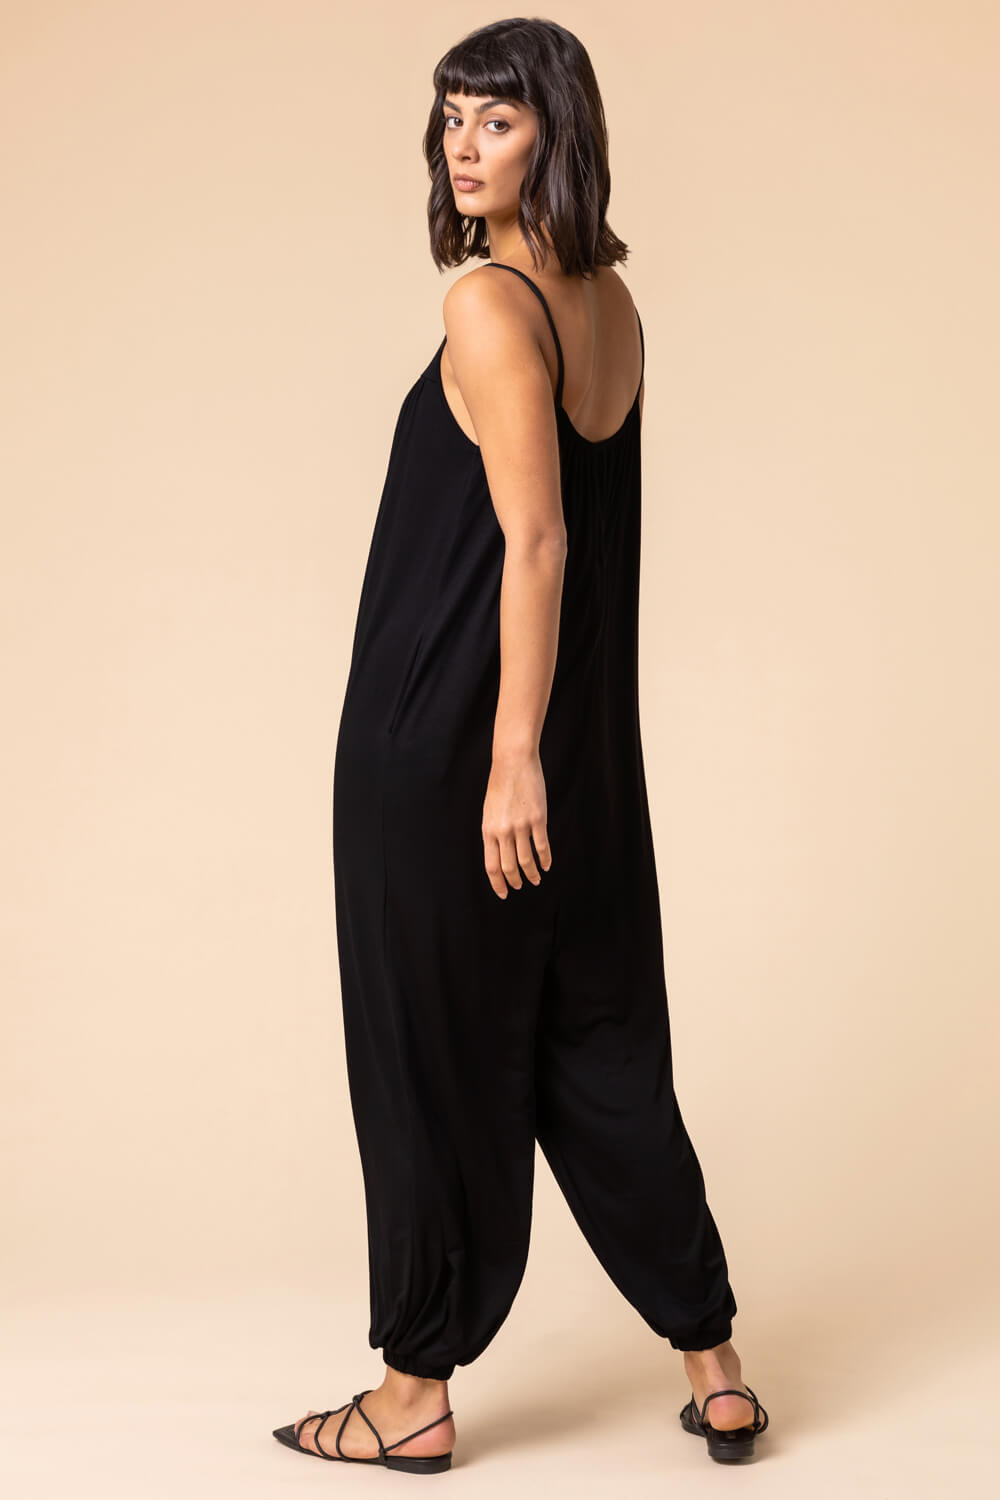 Black Strappy Full Length Jersey Jumpsuit, Image 2 of 5